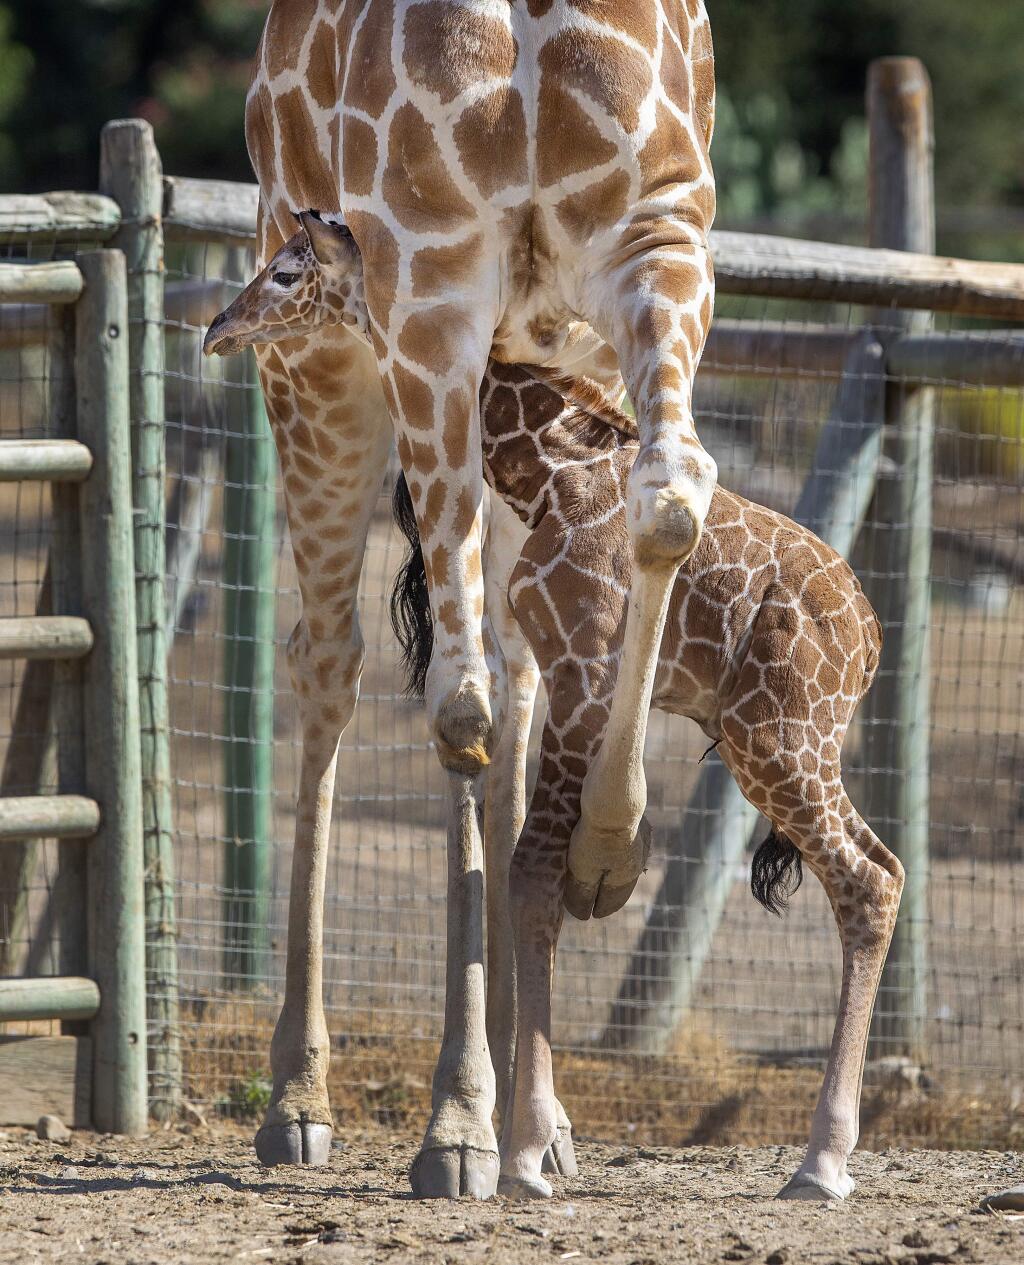 The 41st baby giraffe born at Safari West was born on Tuesday night without the help of their keepers. The 130 lbs., 6-foot tall male reticulated giraffe is on the hoof and nursing from mom Malaika. (photo by John Burgess/The Press Democrat)